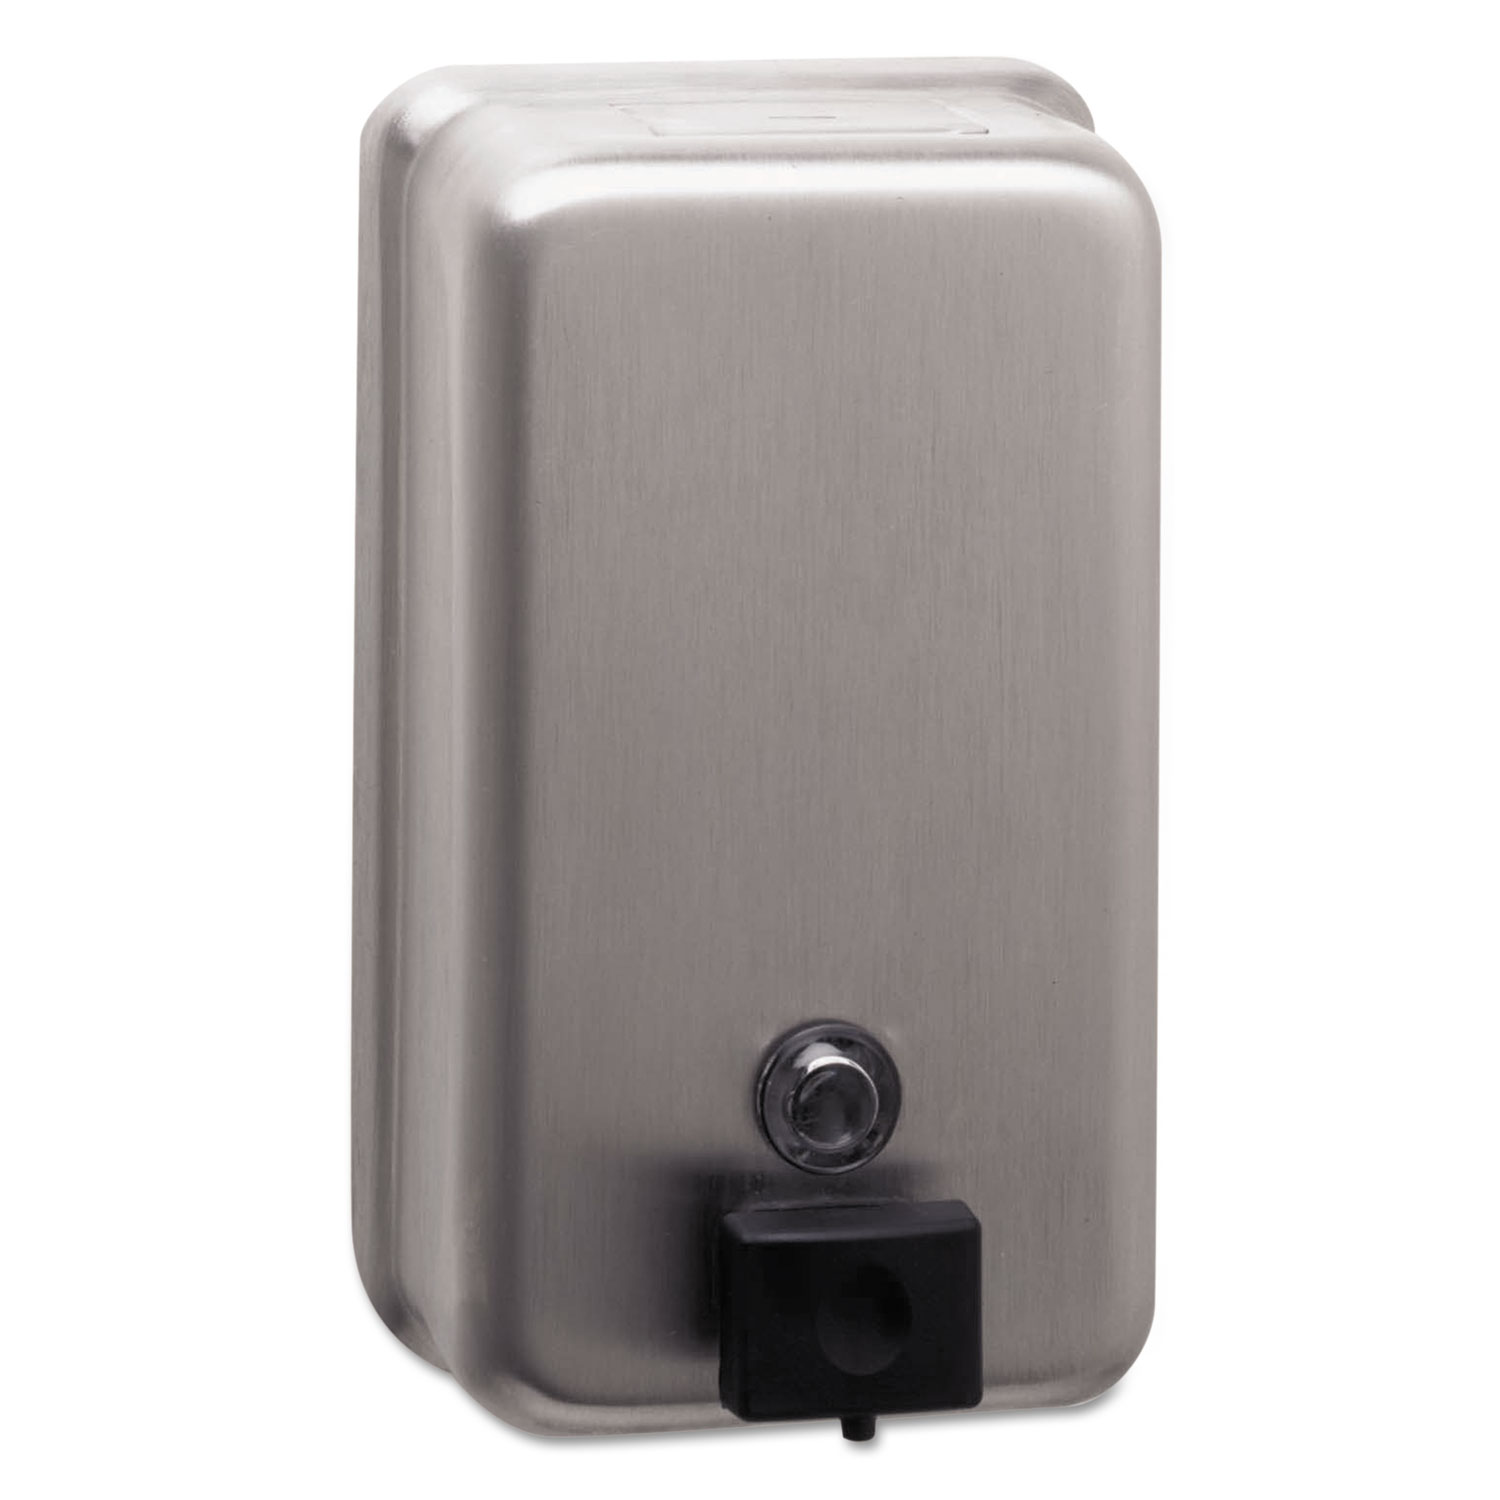  Bobrick 2111 ClassicSeries Surface-Mounted Soap Dispenser, 40 oz, 4.75 x 3.5 x 8.13, Stainless Steel (BOB2111) 